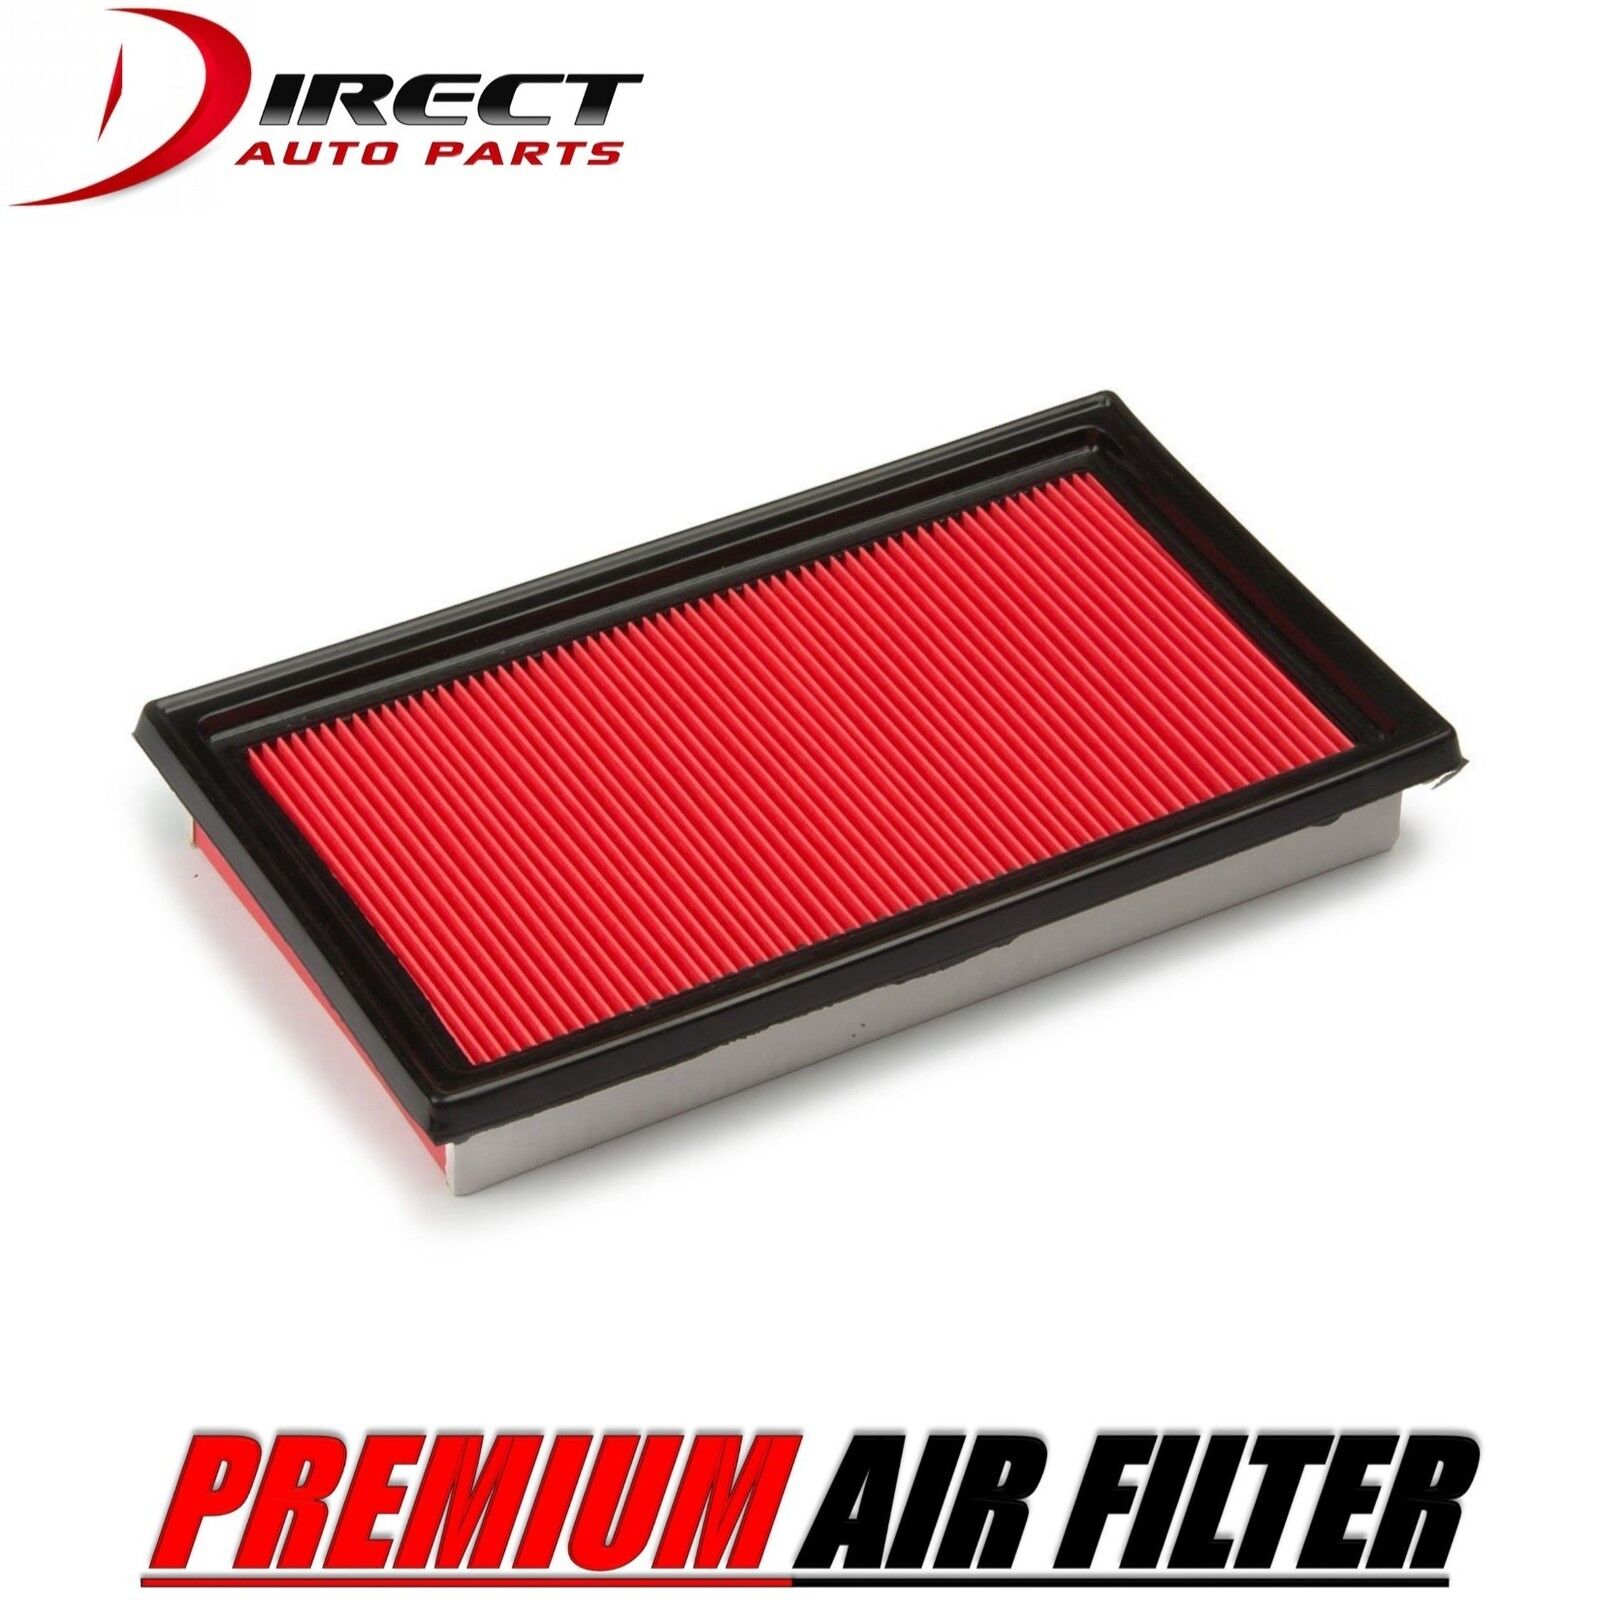 AIR FILTER FOR NISSAN FITS-TRAIL 2.5L ENGINE 2002 - 2007